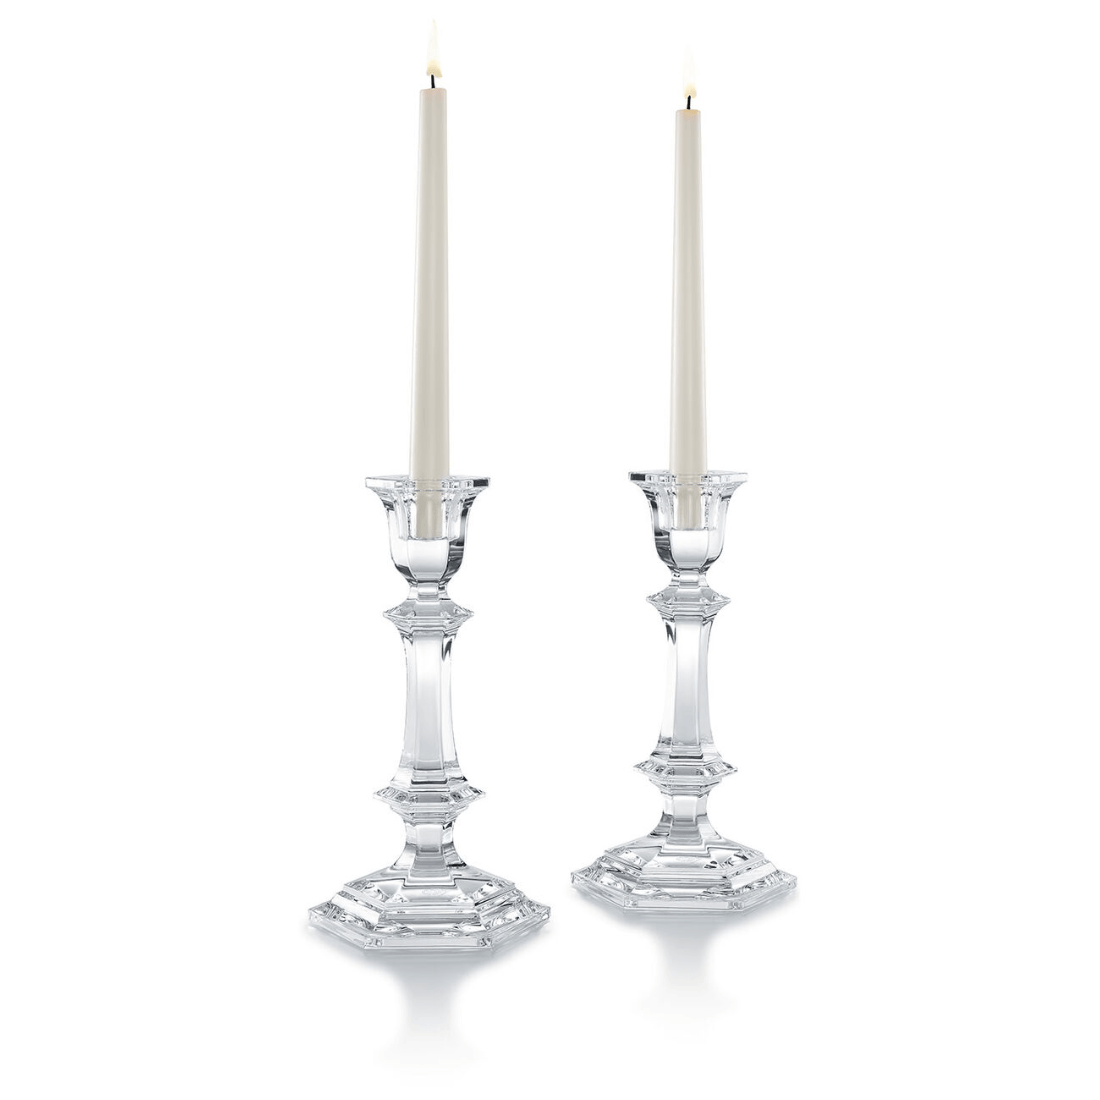 Baccarat Harcourt Candlesticks, set of two 0